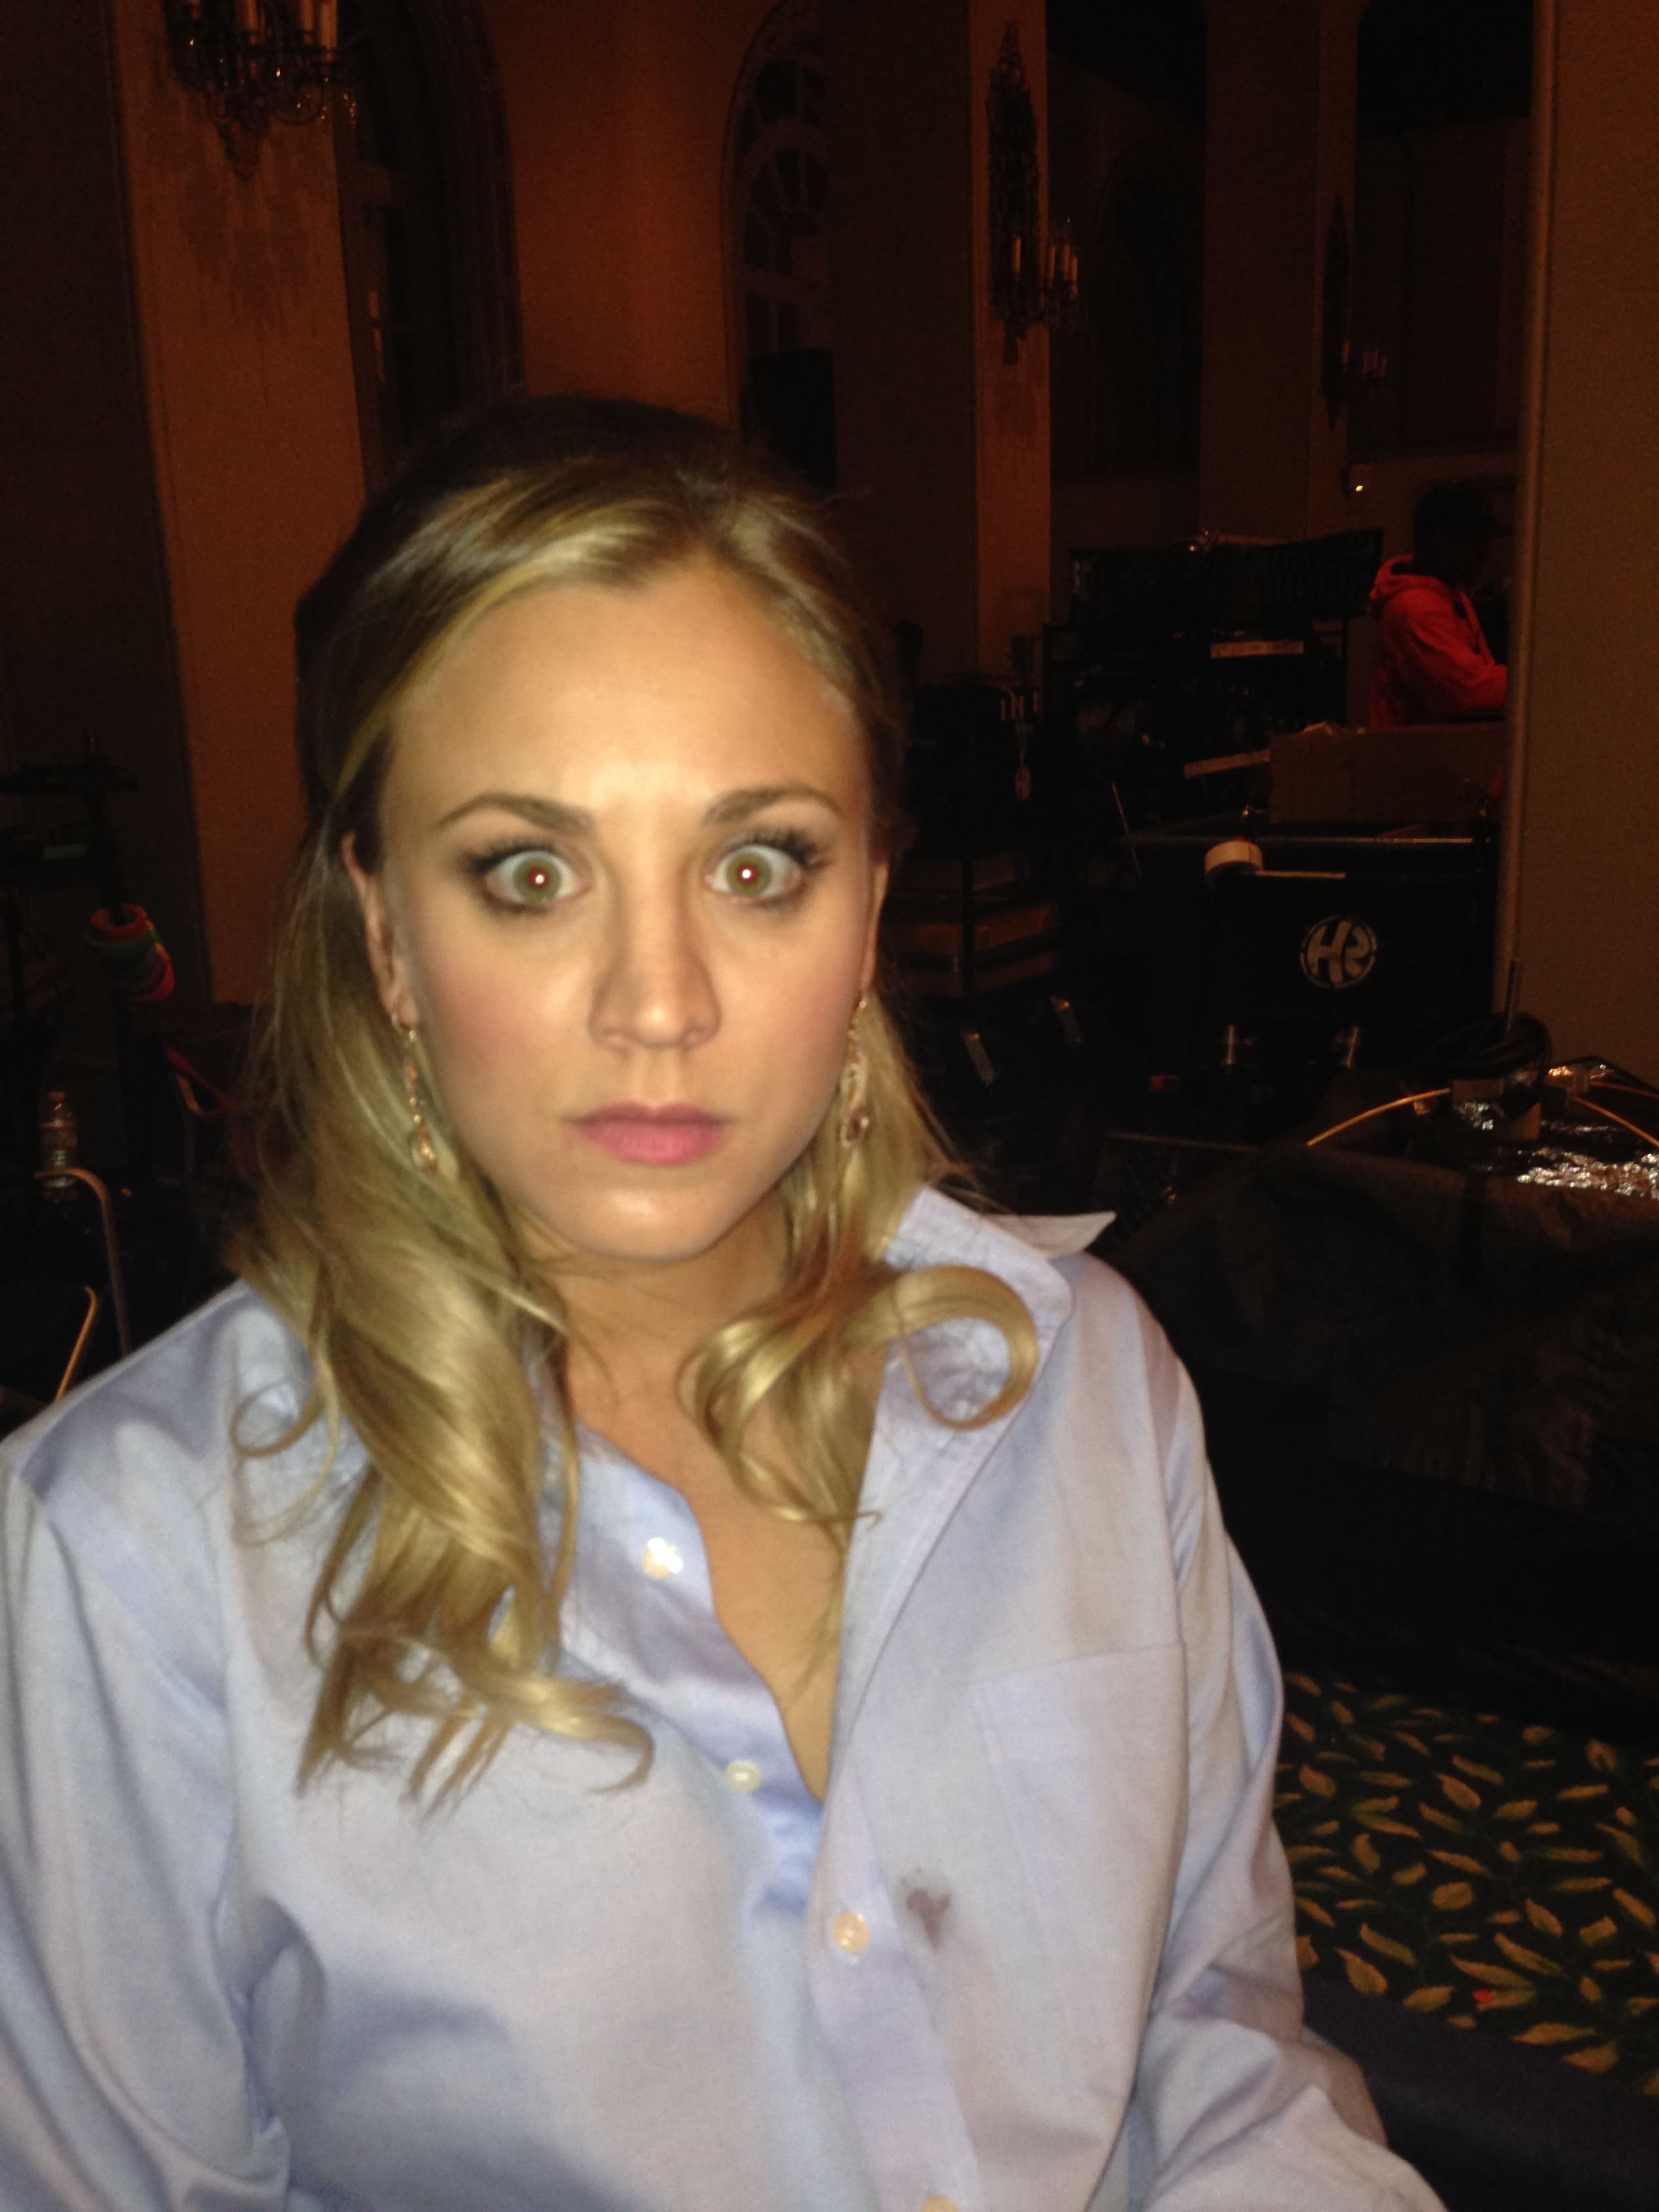 hacked kaley cuoco pic of her in a light blue shirt